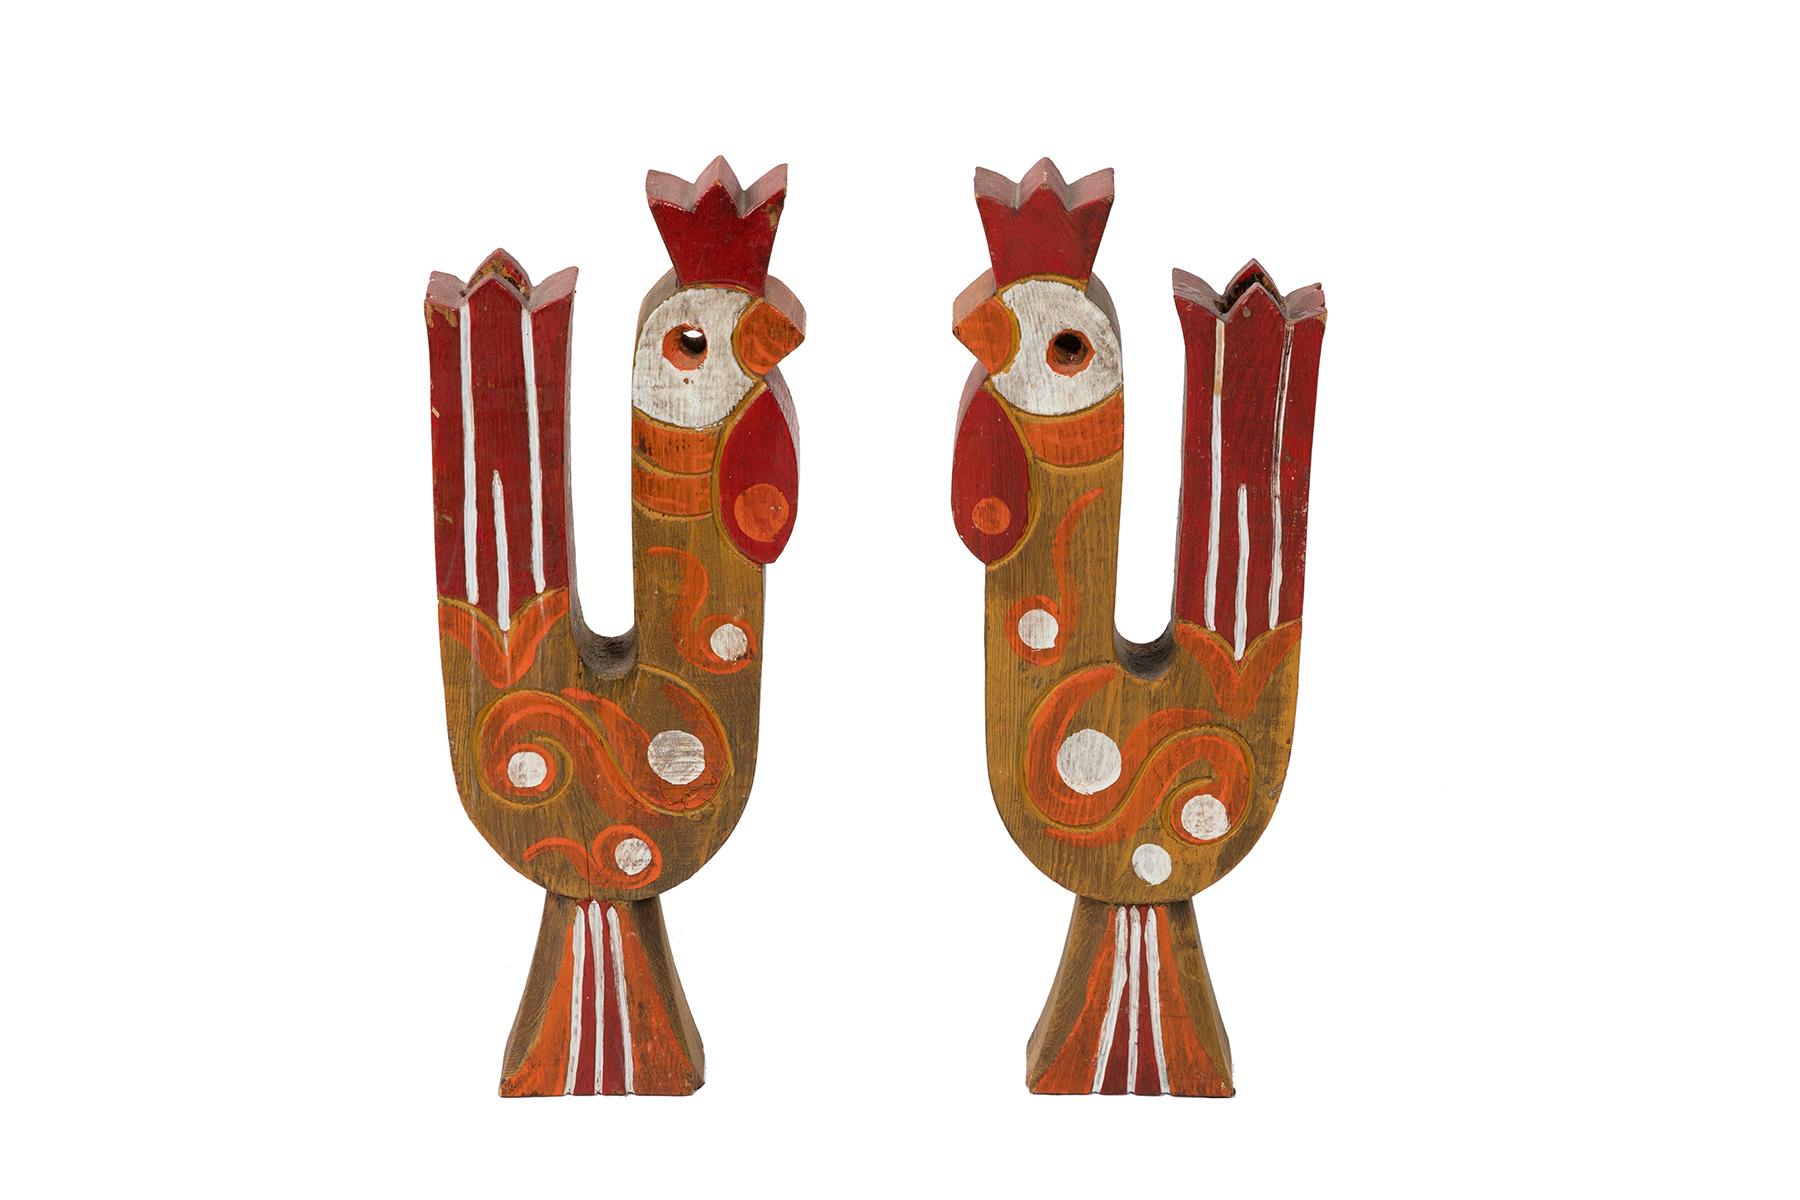 Pair of wonderful folk art candle holders from Mexico circa late 1960's. wonderful color and presence to these. Price listed is for the pair.